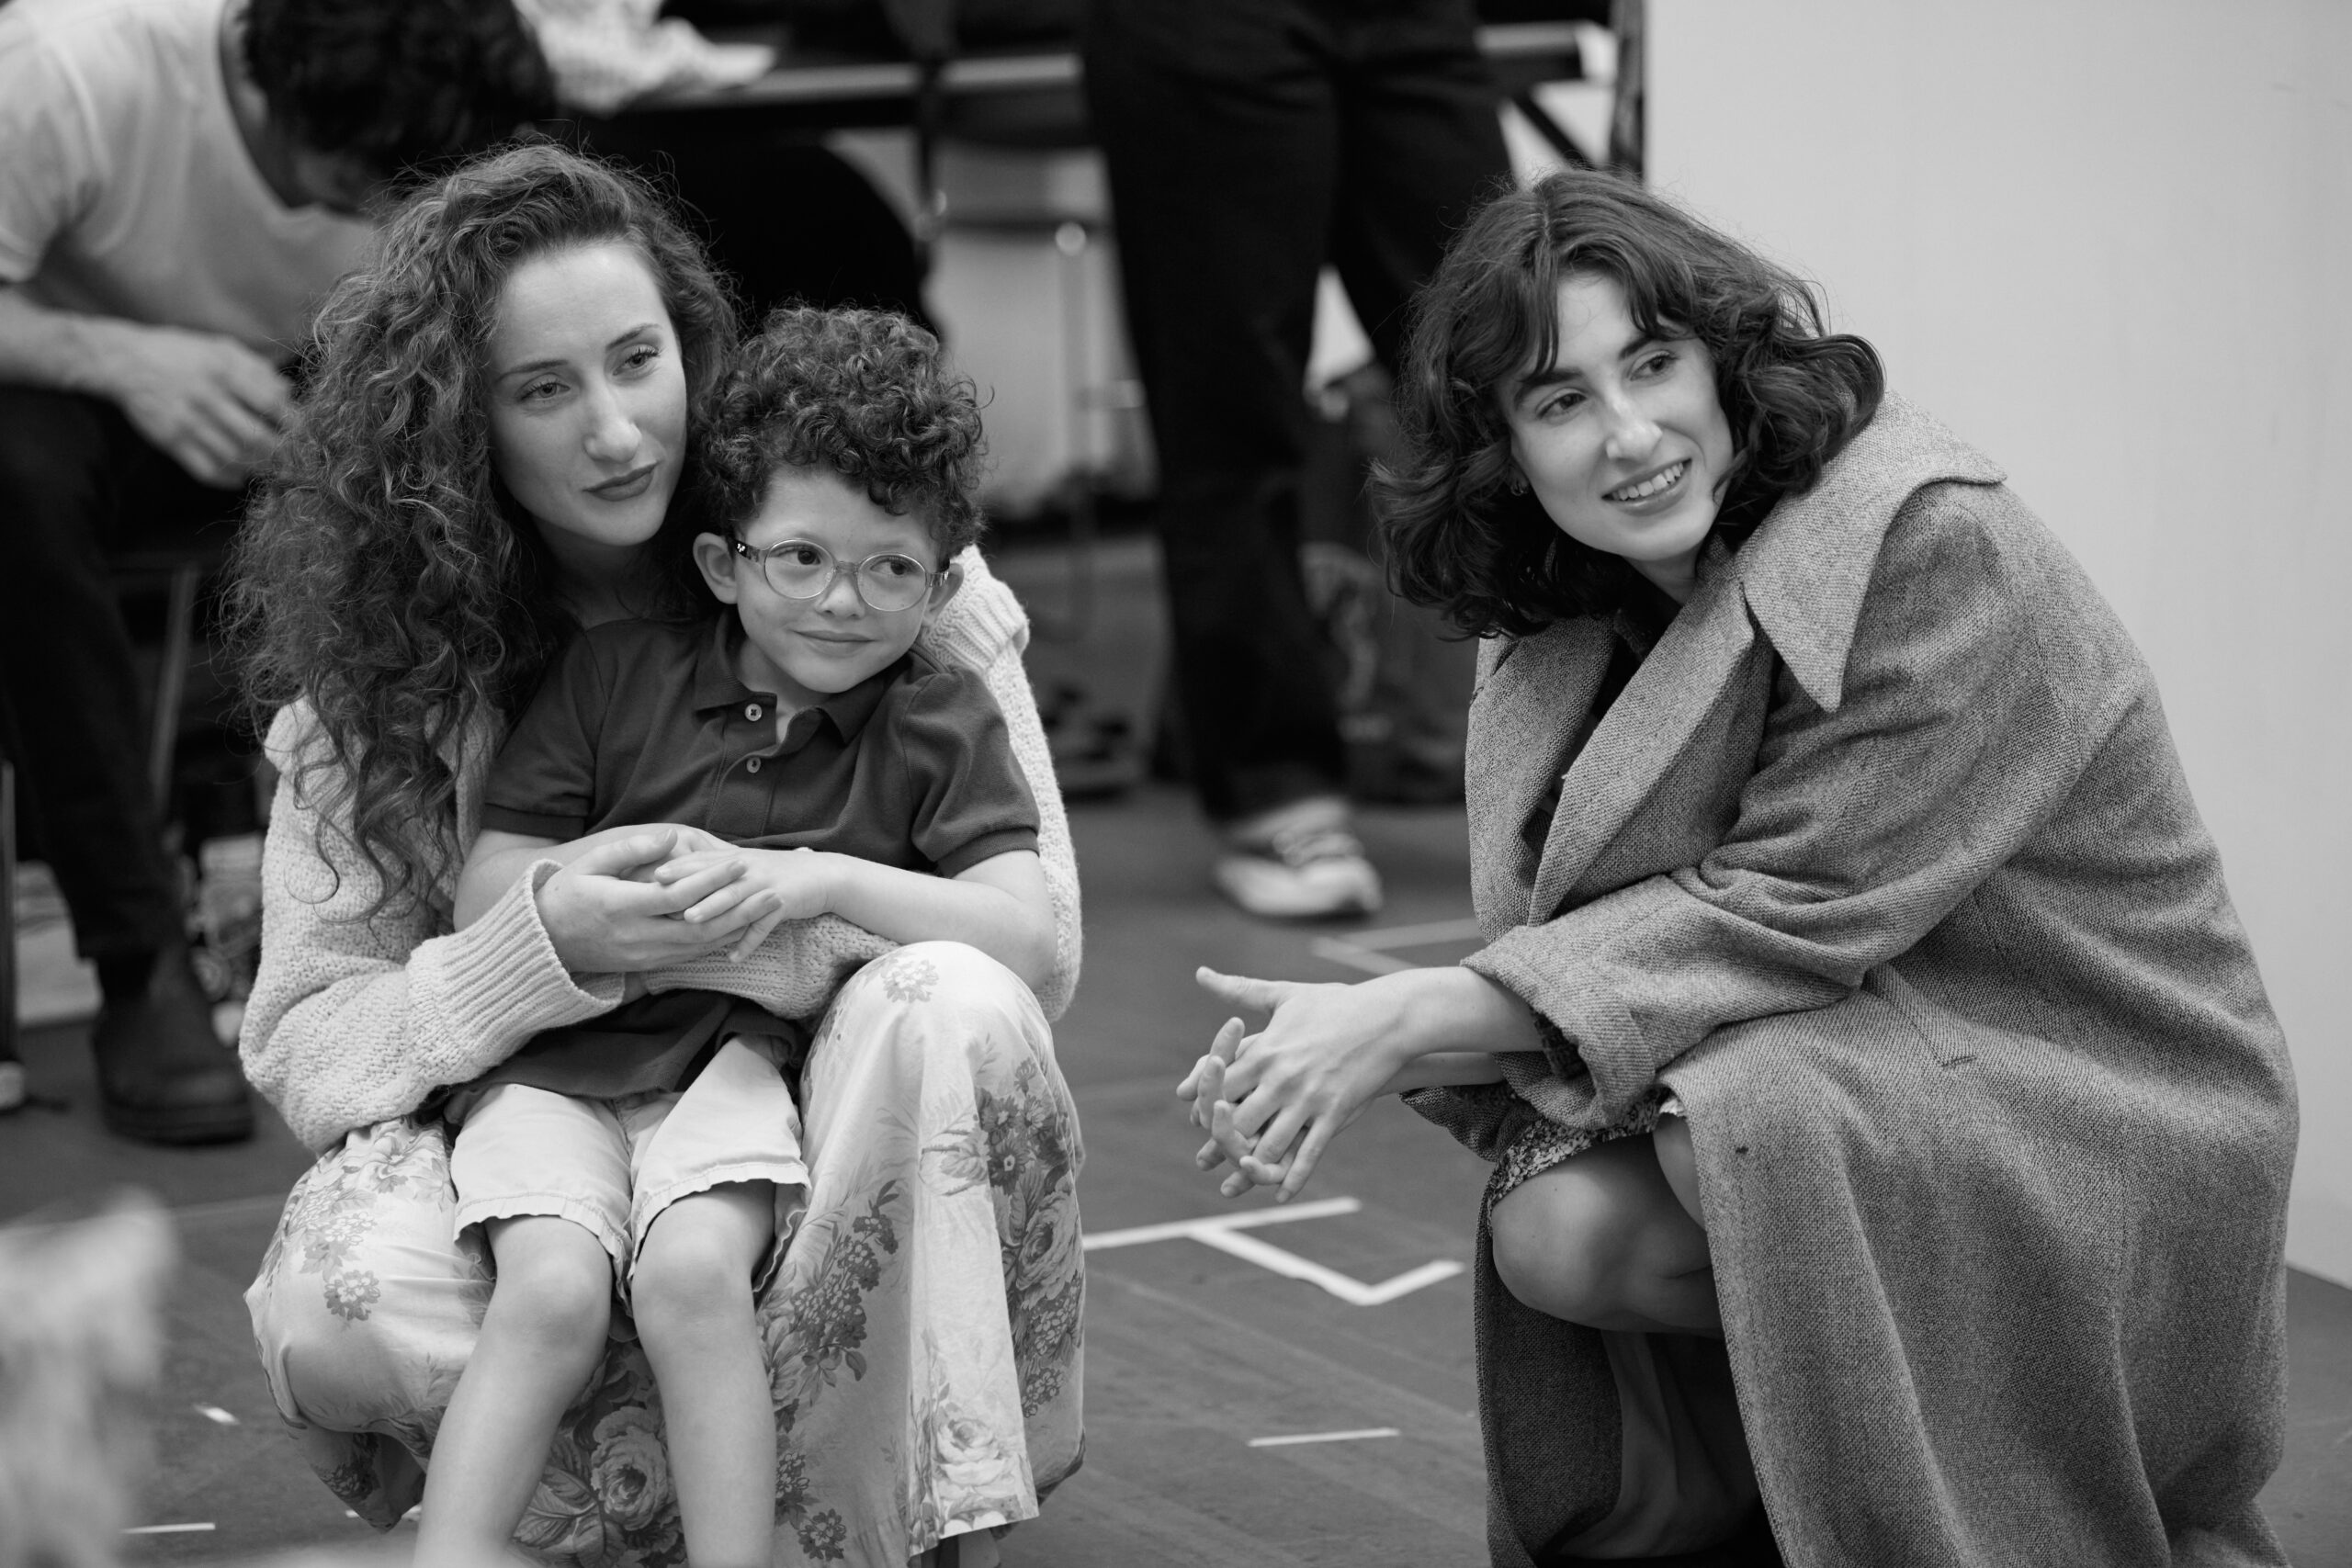 Eden Epstein, Max Ryan Burach, and Colleen Litchfield in rehearsals for Leopoldstadt. Photo by Jenny Anderson.